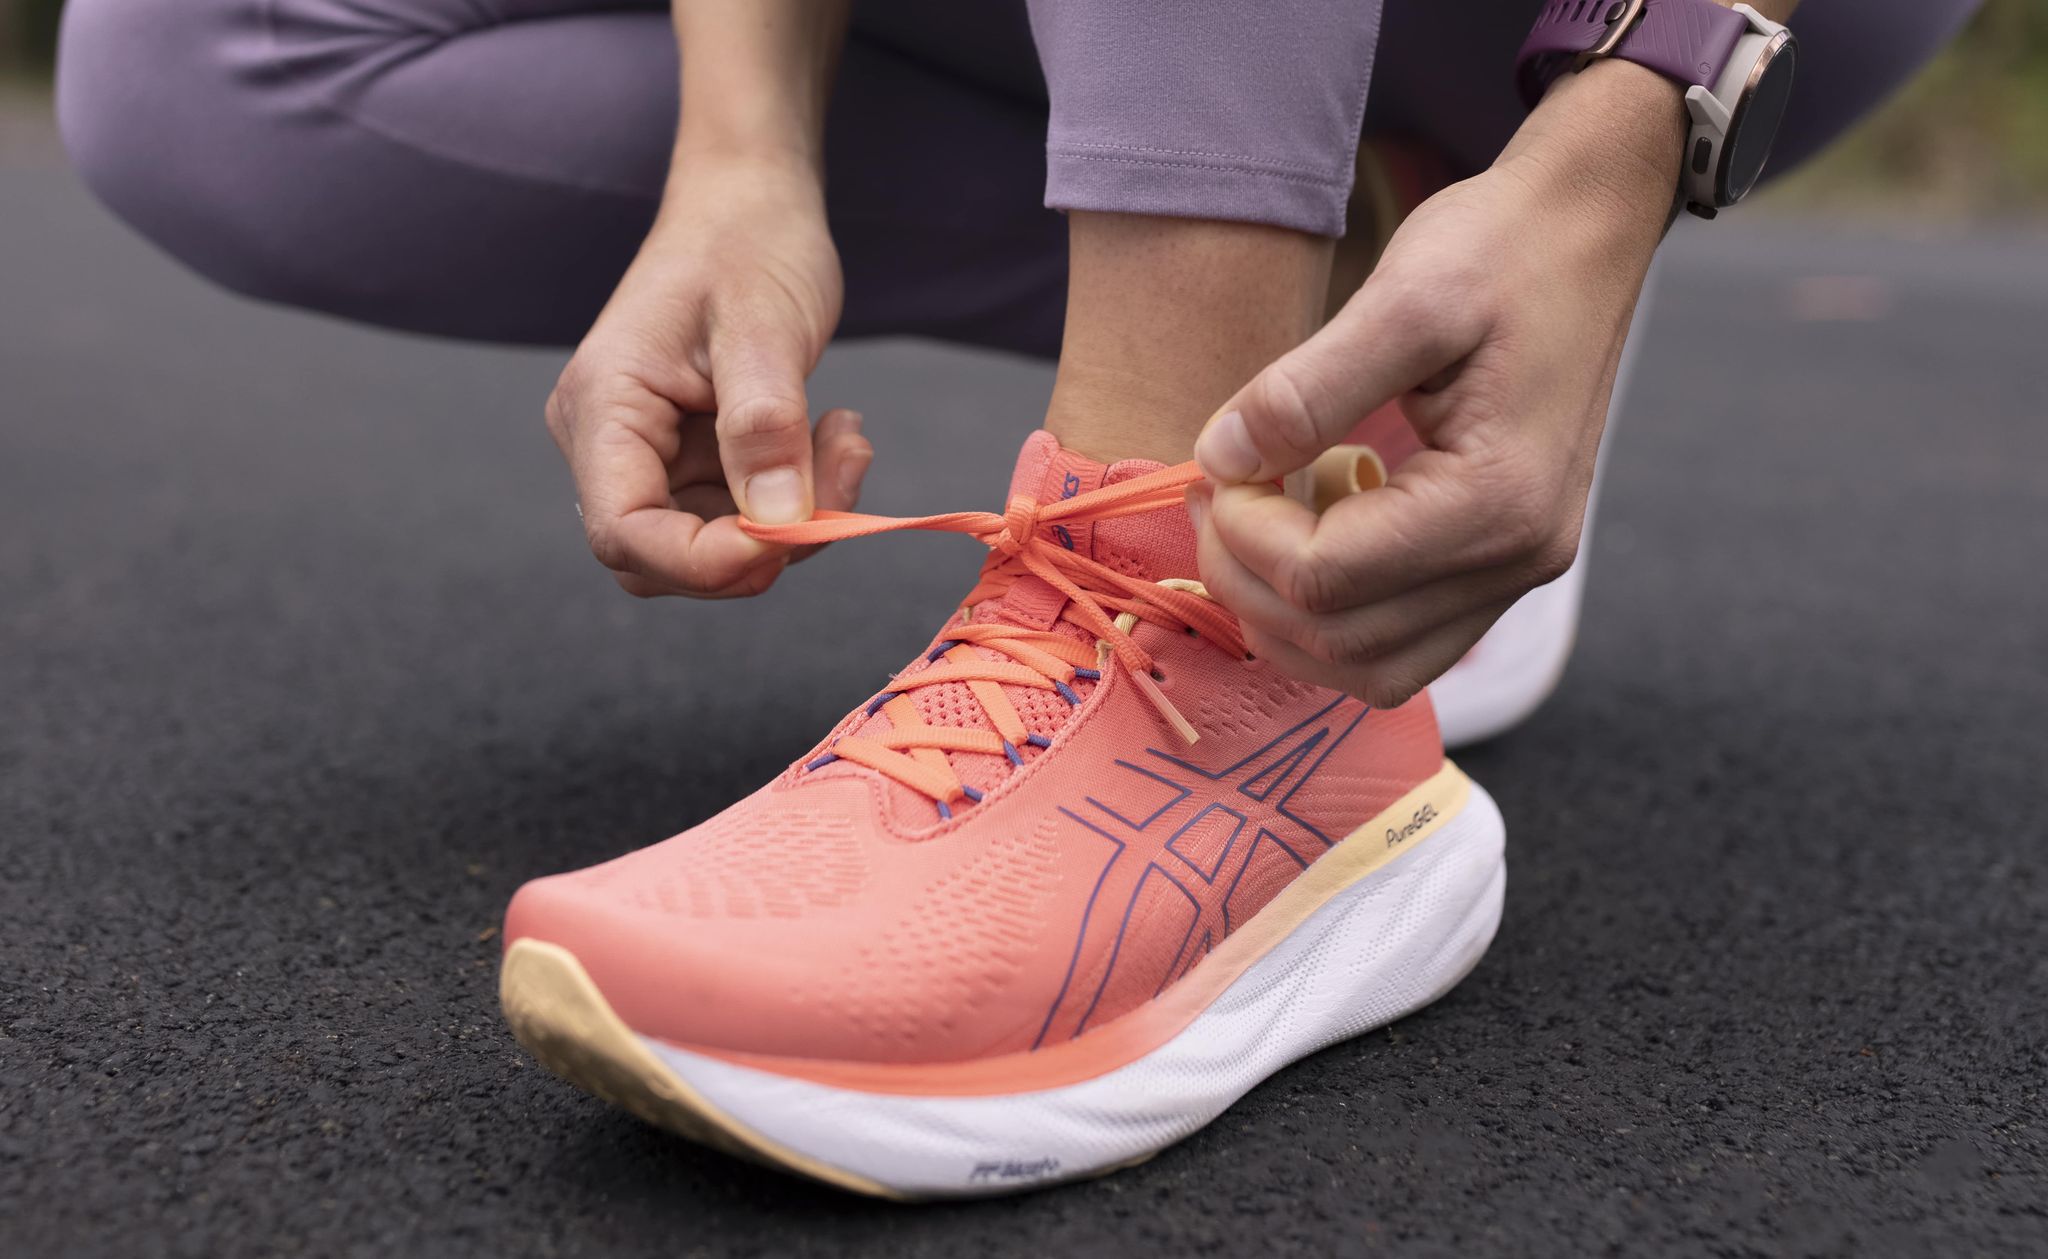 ASICS Gel-Nimbus 25: Tried and tested